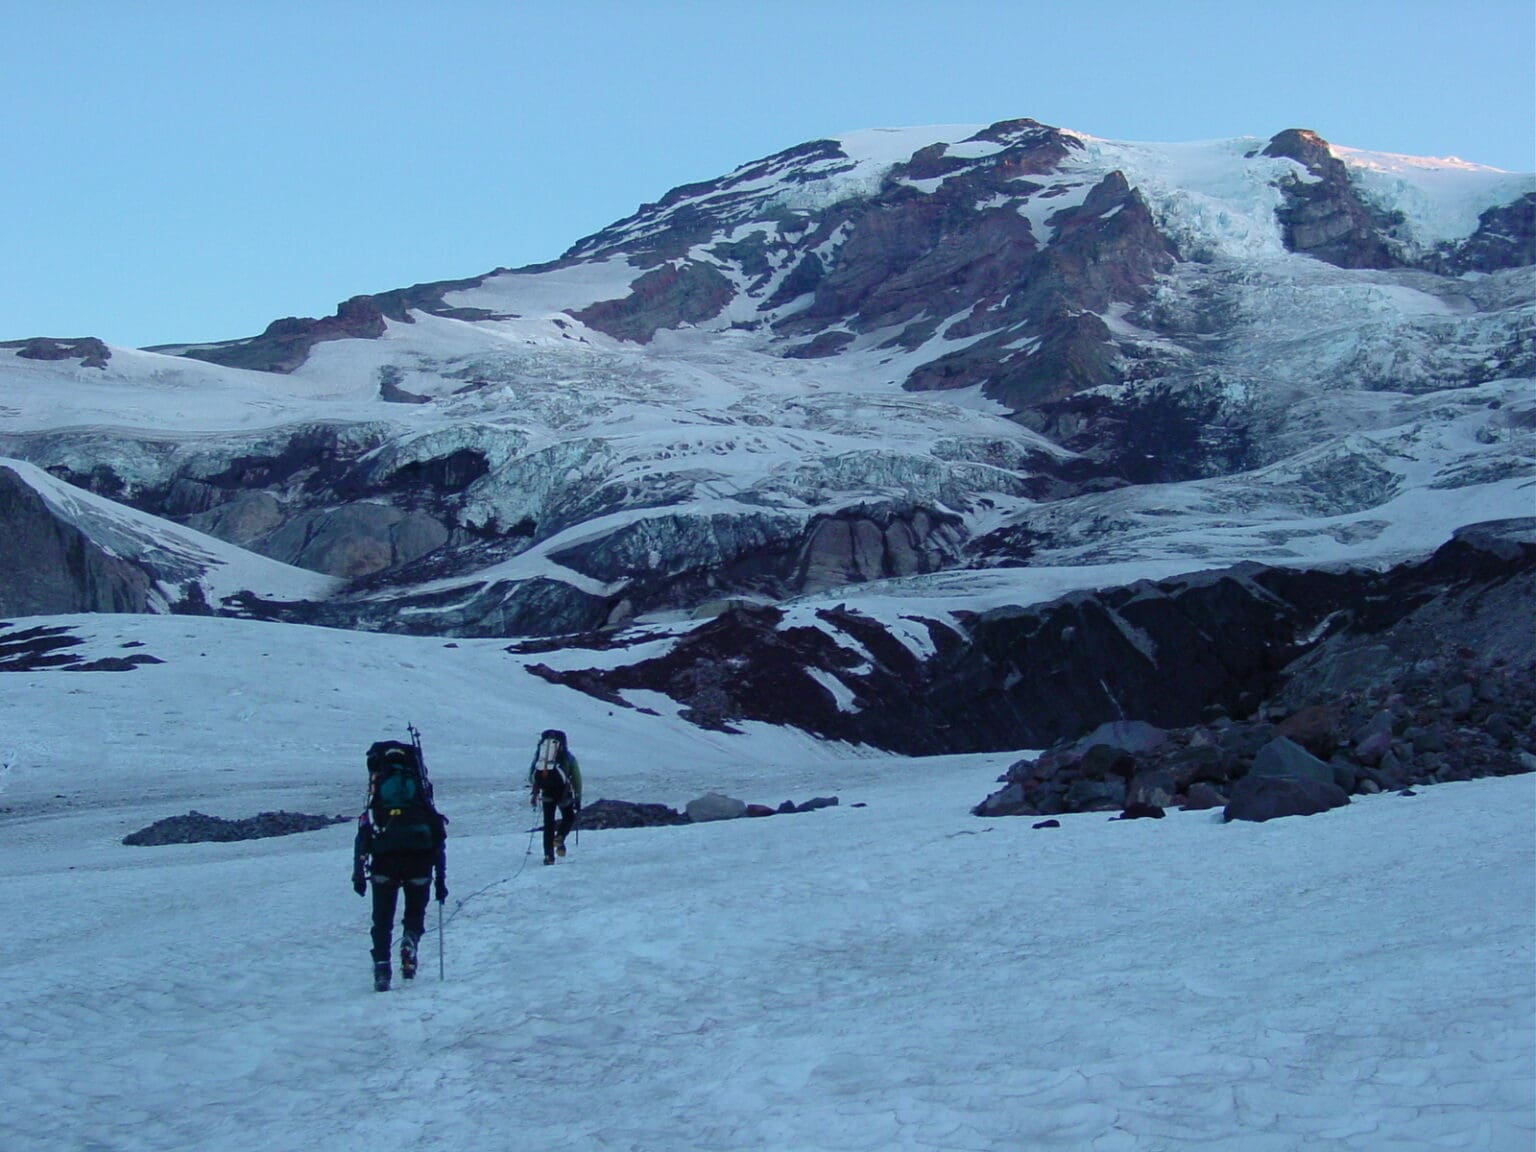 A guided party trudges their way up Mount Rainier, covered in snow.